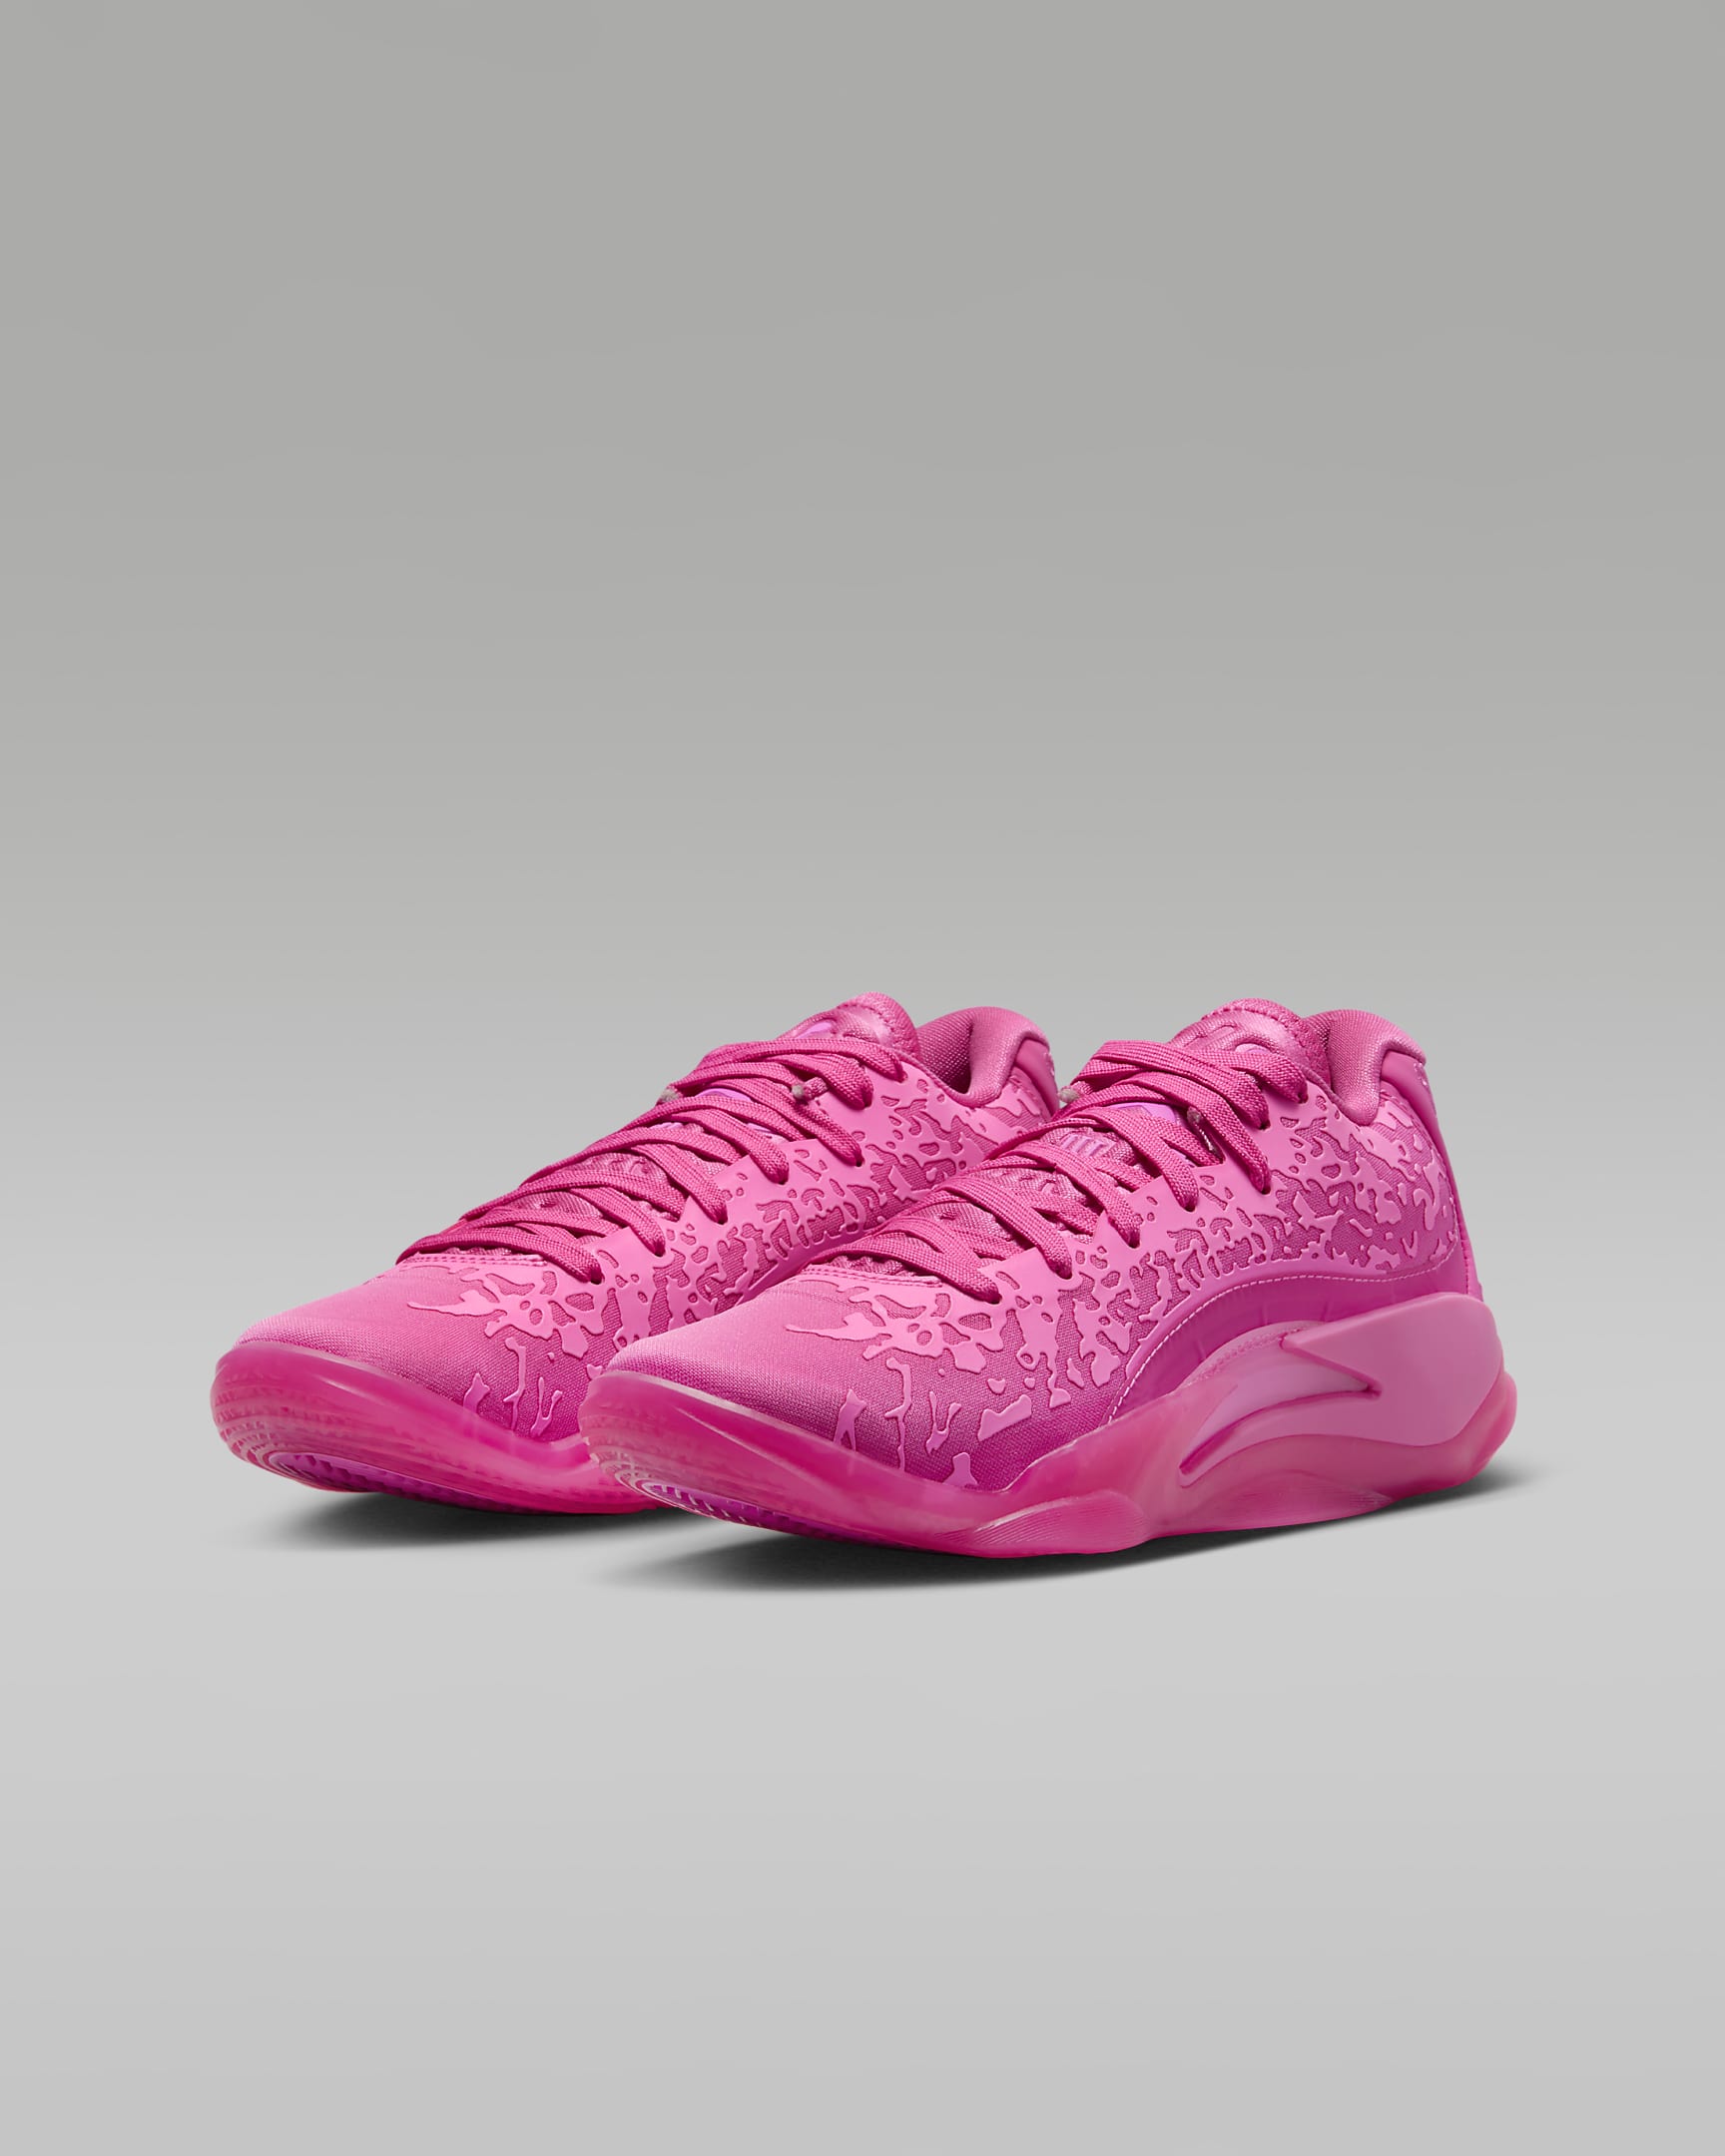 Chaussure de basket Zion 3 pour ado - Pinksicle/Pink Glow/Pink Spell